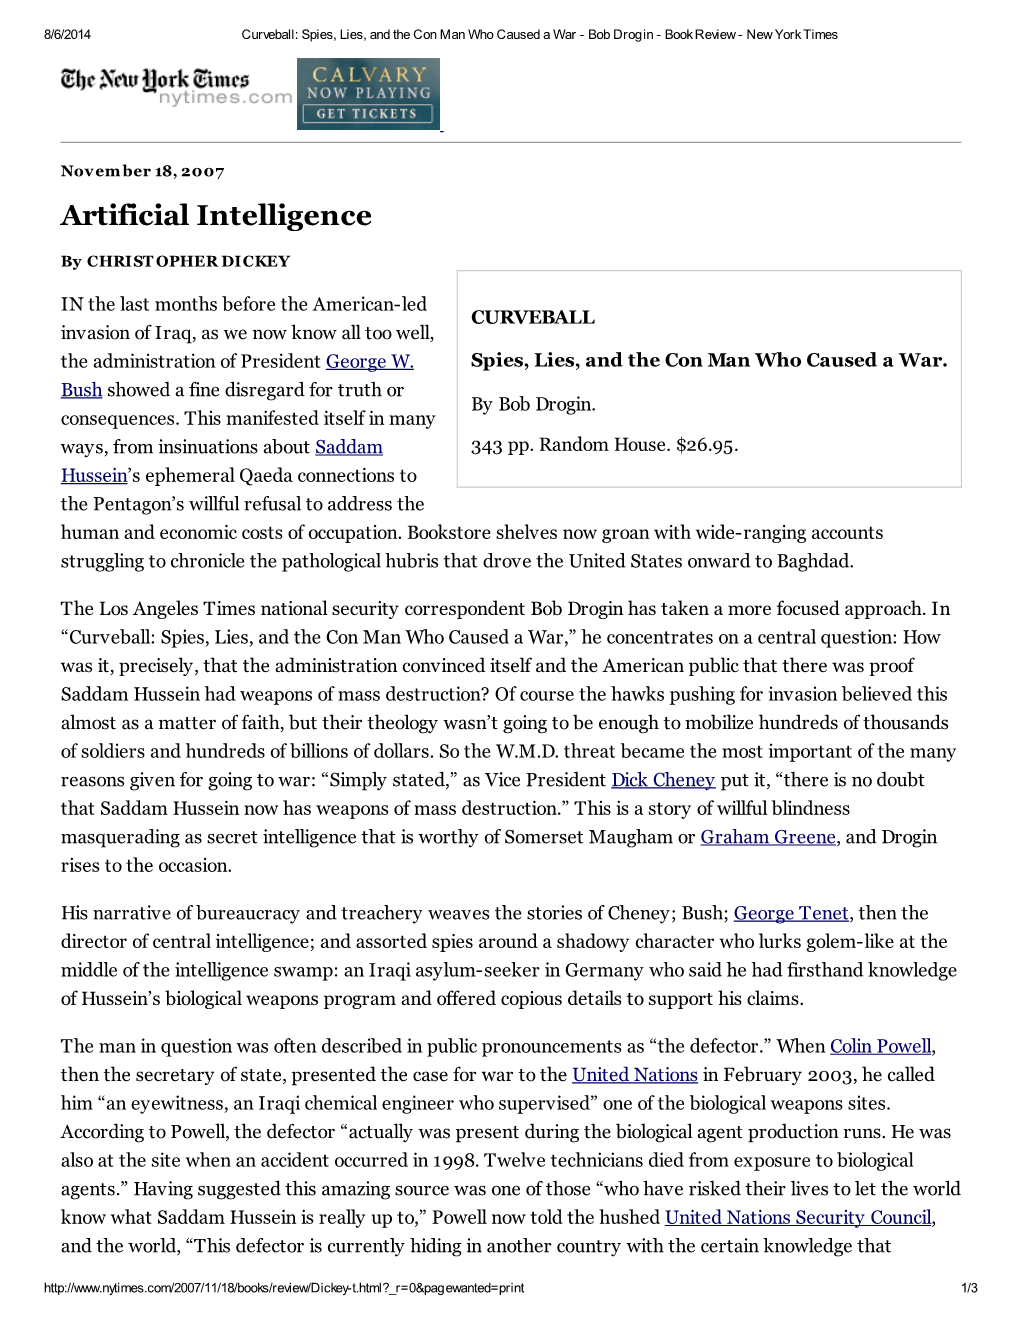 Artificial Intelligence, by Christopher Dickey, Book Review, Curveball